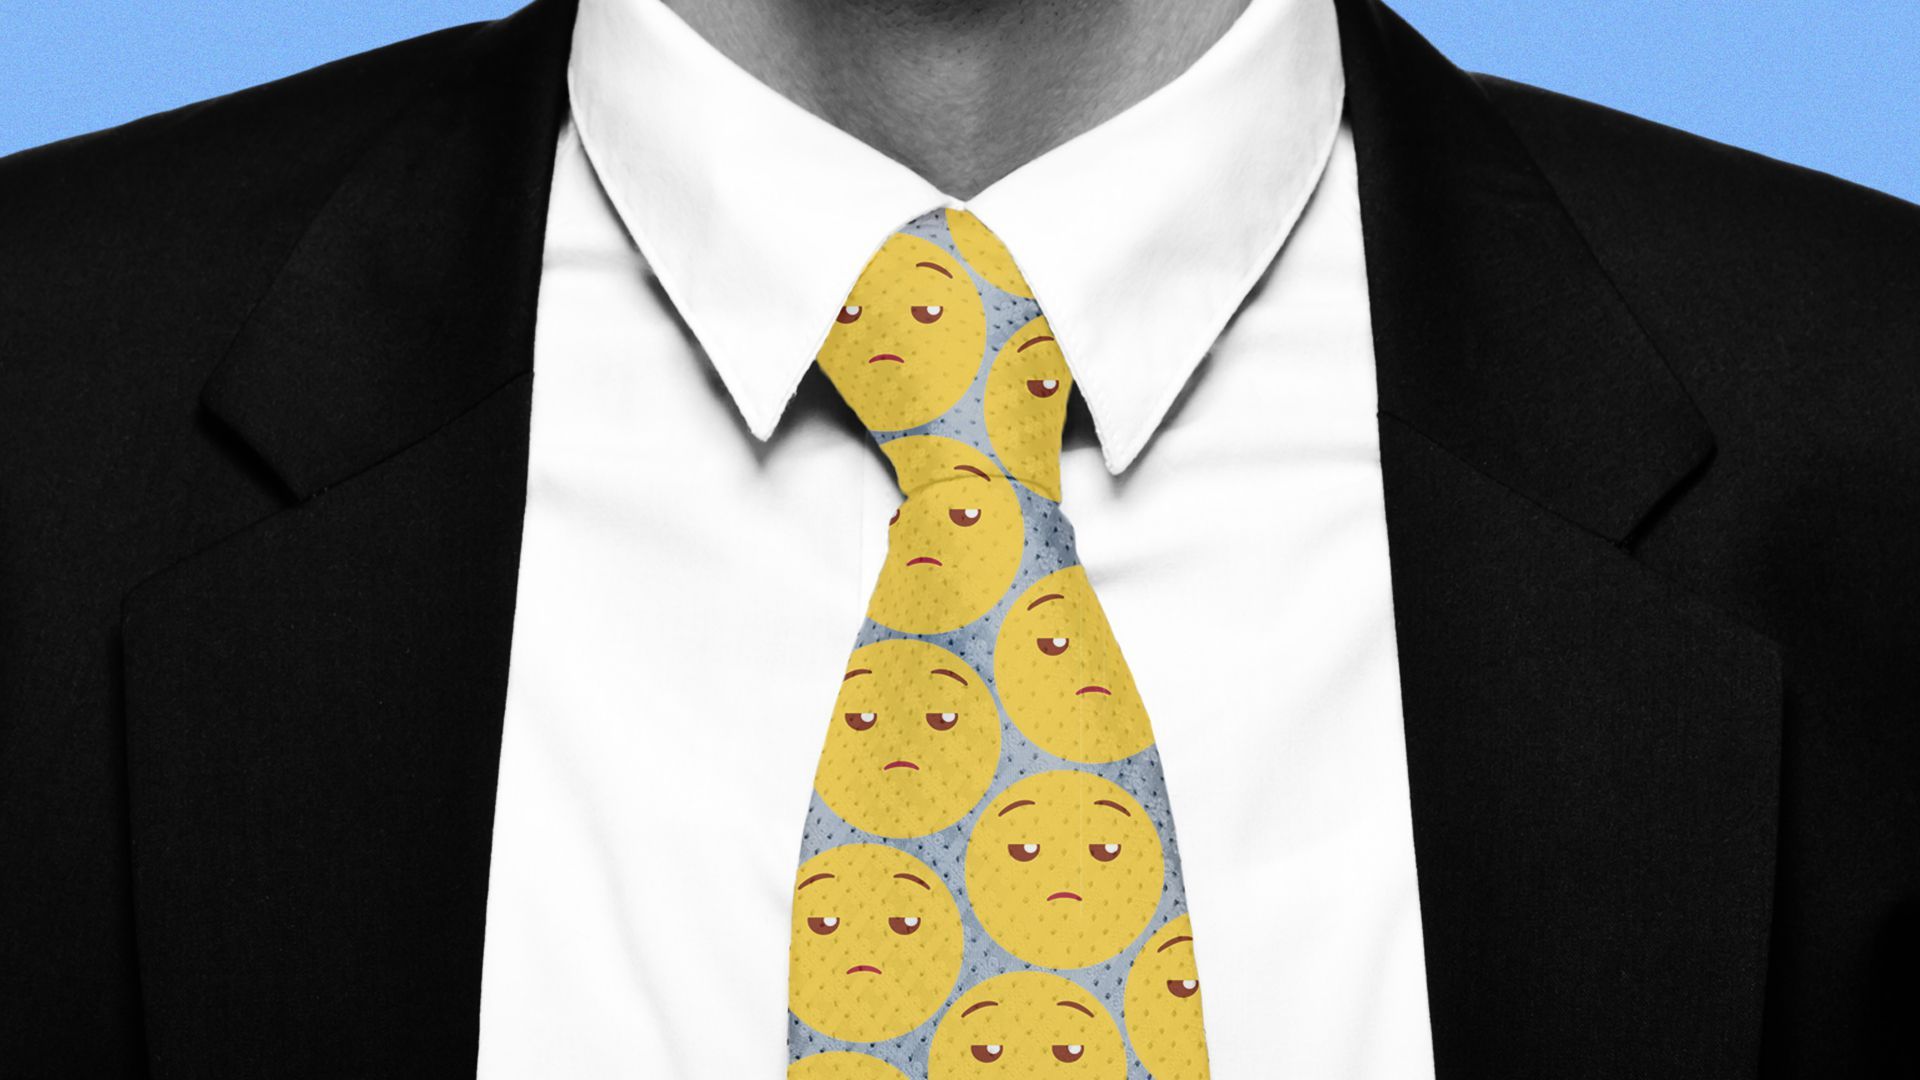 Illustration of a man wearing a tie with a pattern of 